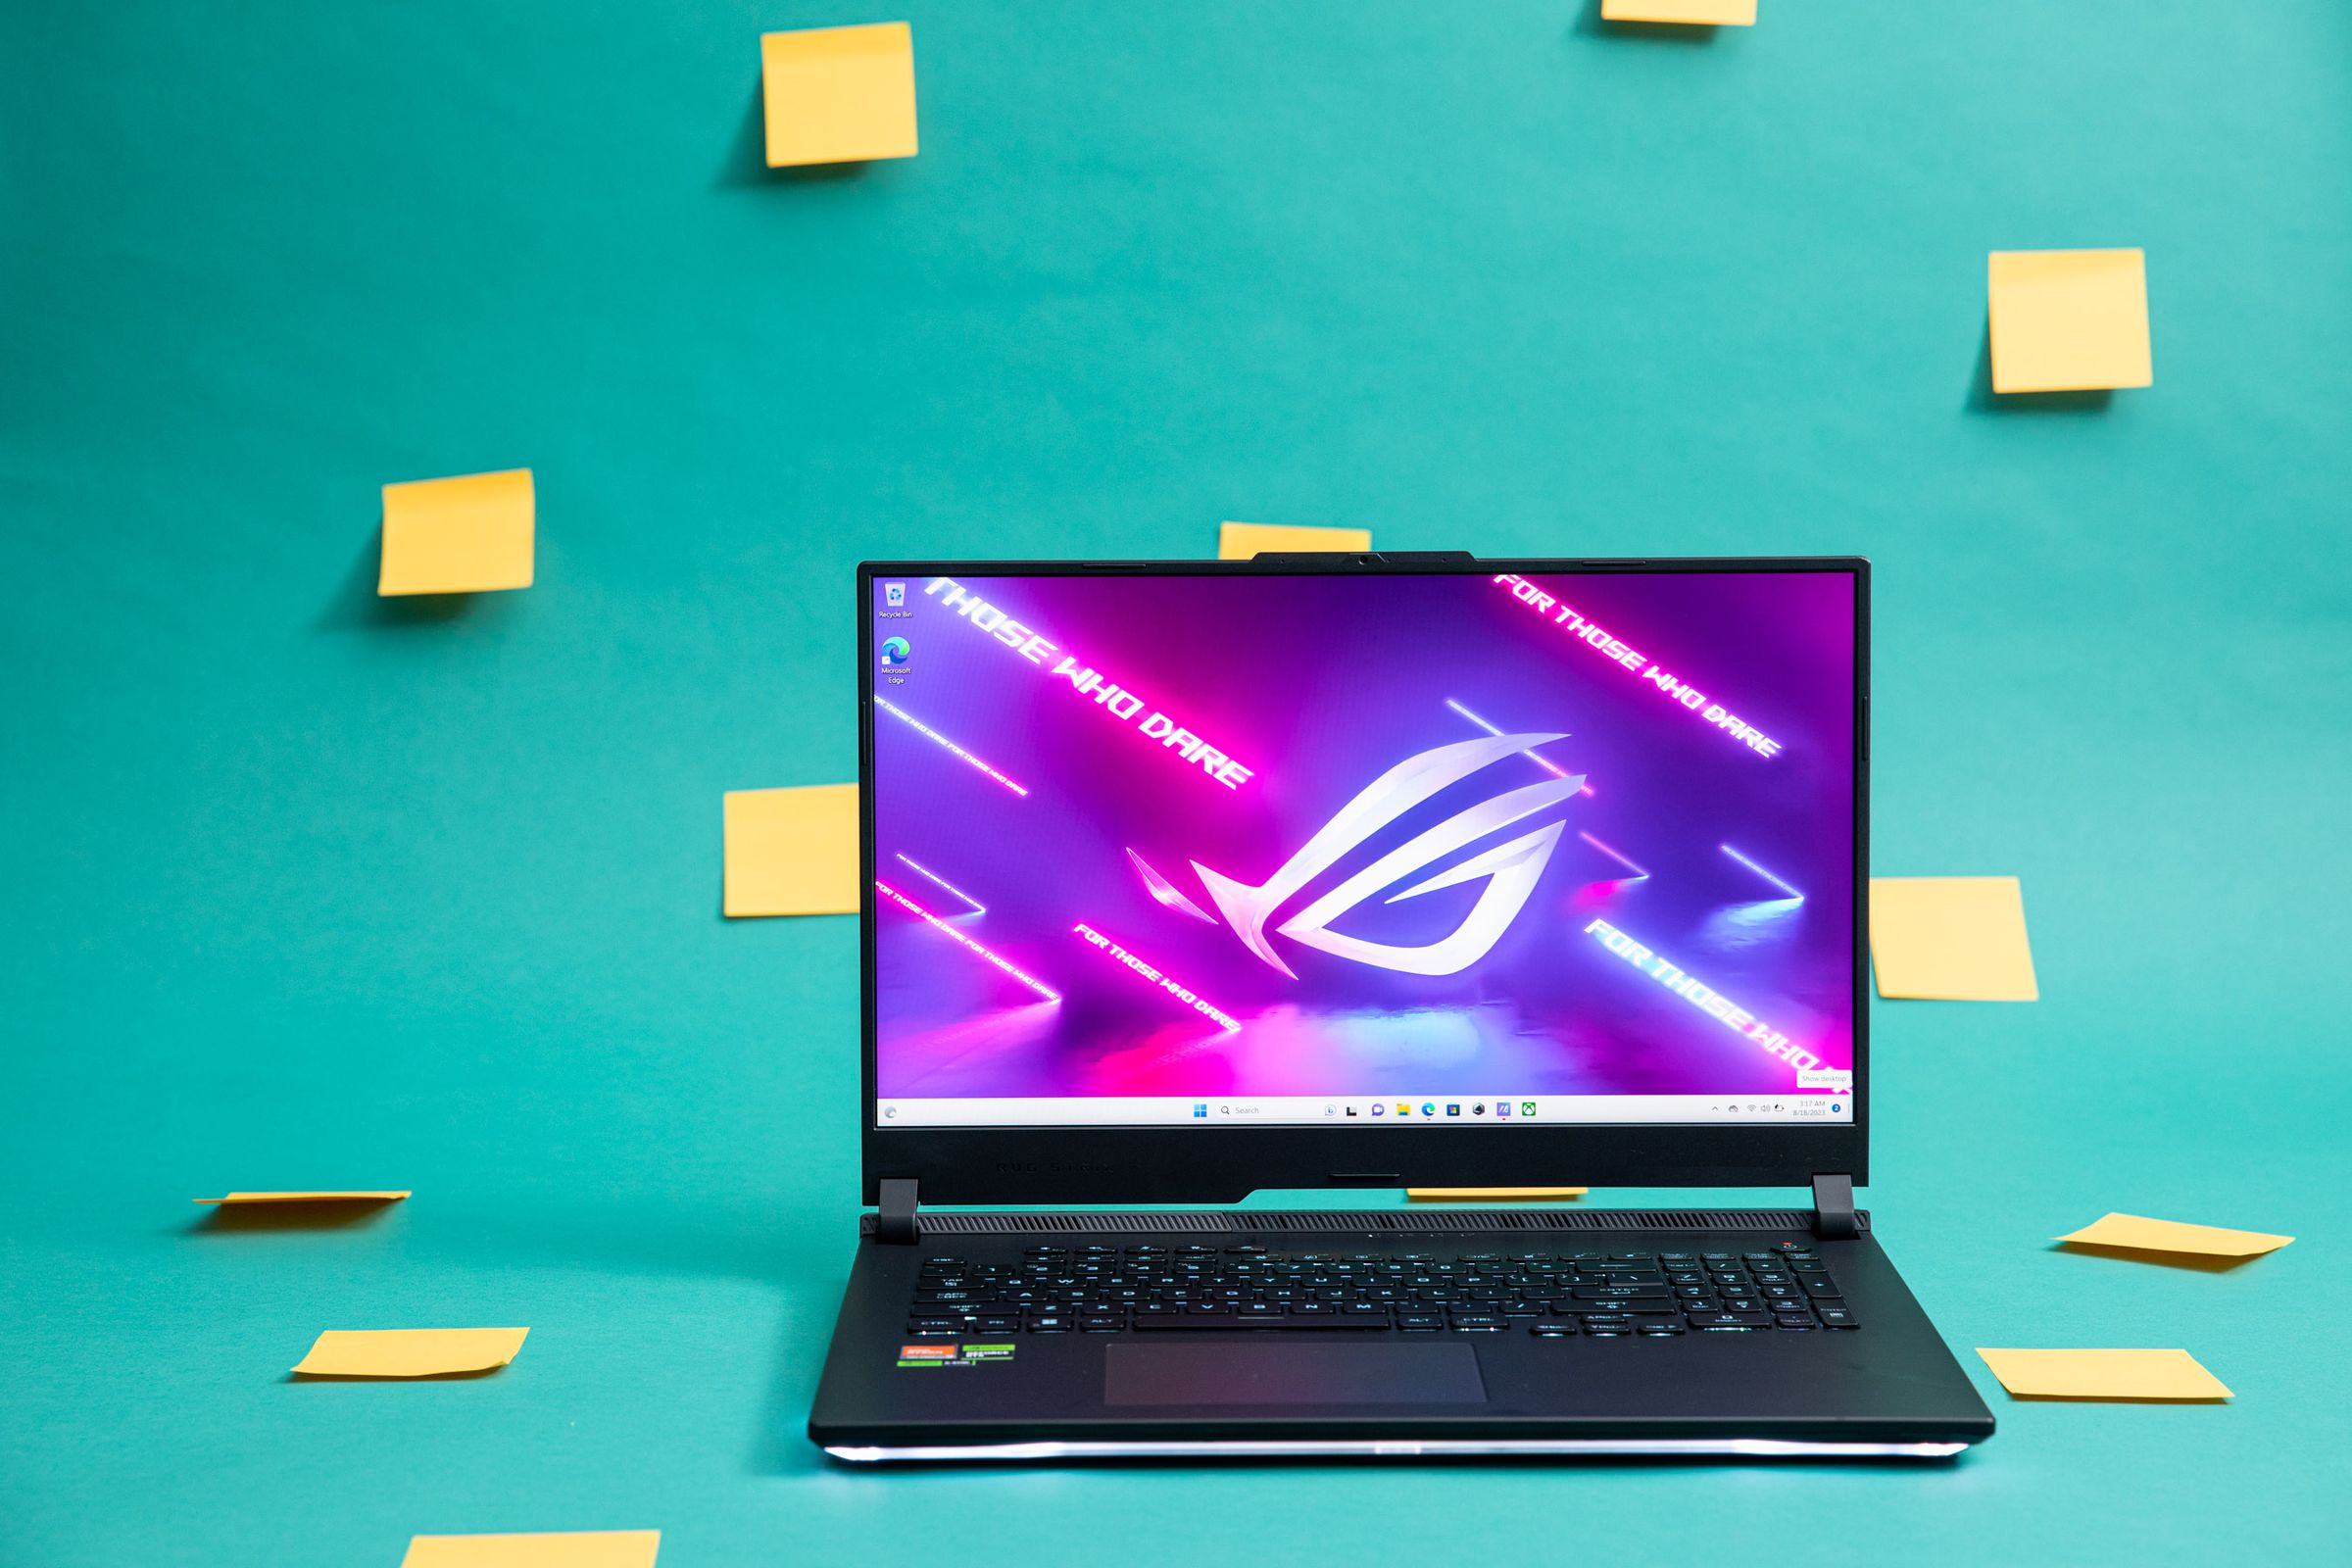 The Asus ROG Strix Scar X3D on a green background decorated with yellow Post-it notes.